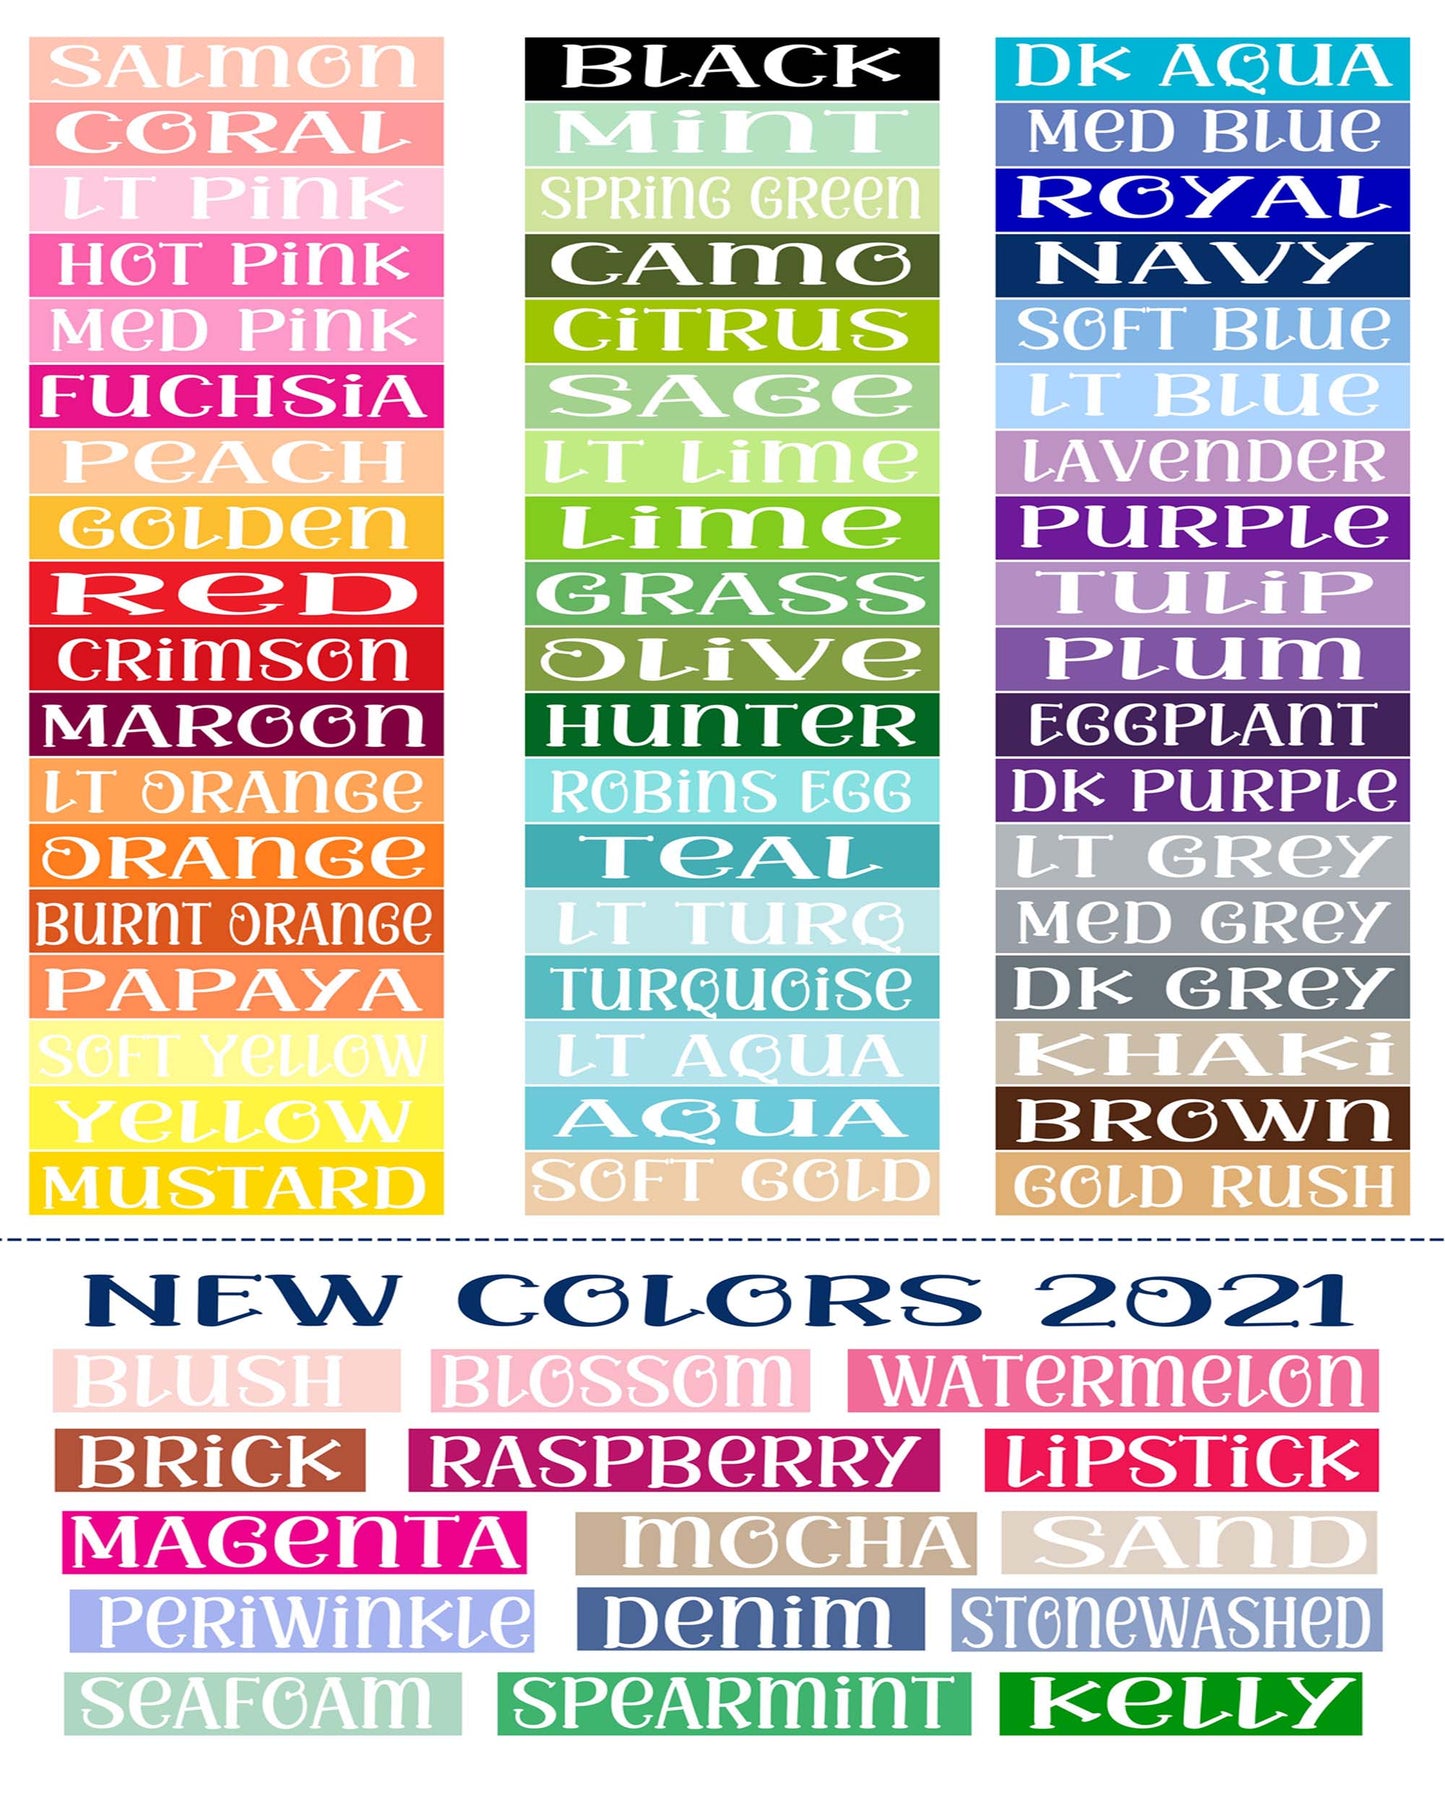 Personalized Baby Name Blanket - Classic Design - The Emilio